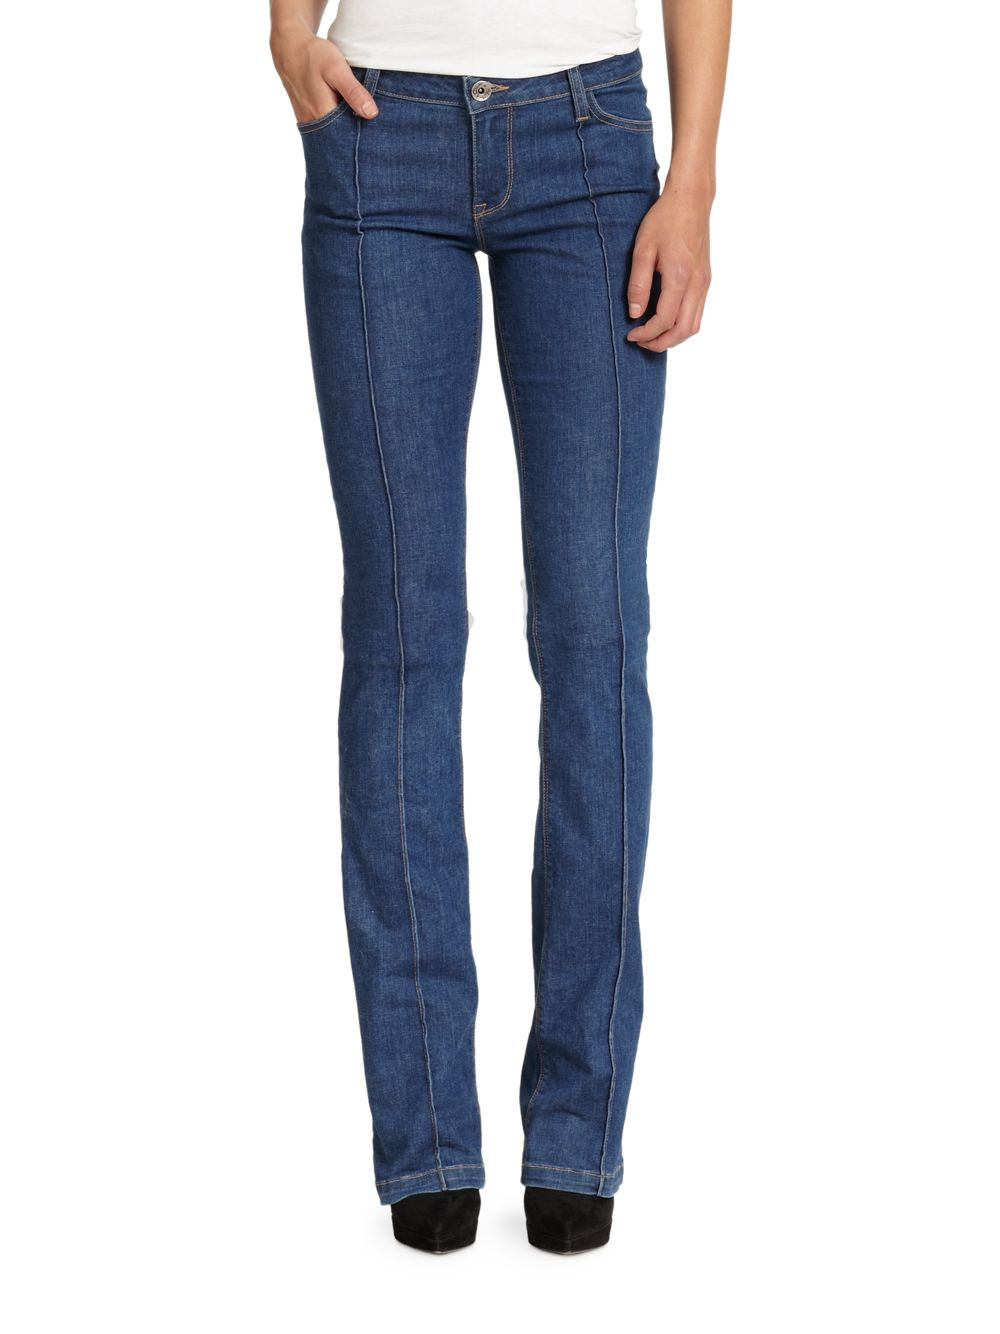 Lyst - Alice + Olivia Bootcut Jeans in Blue